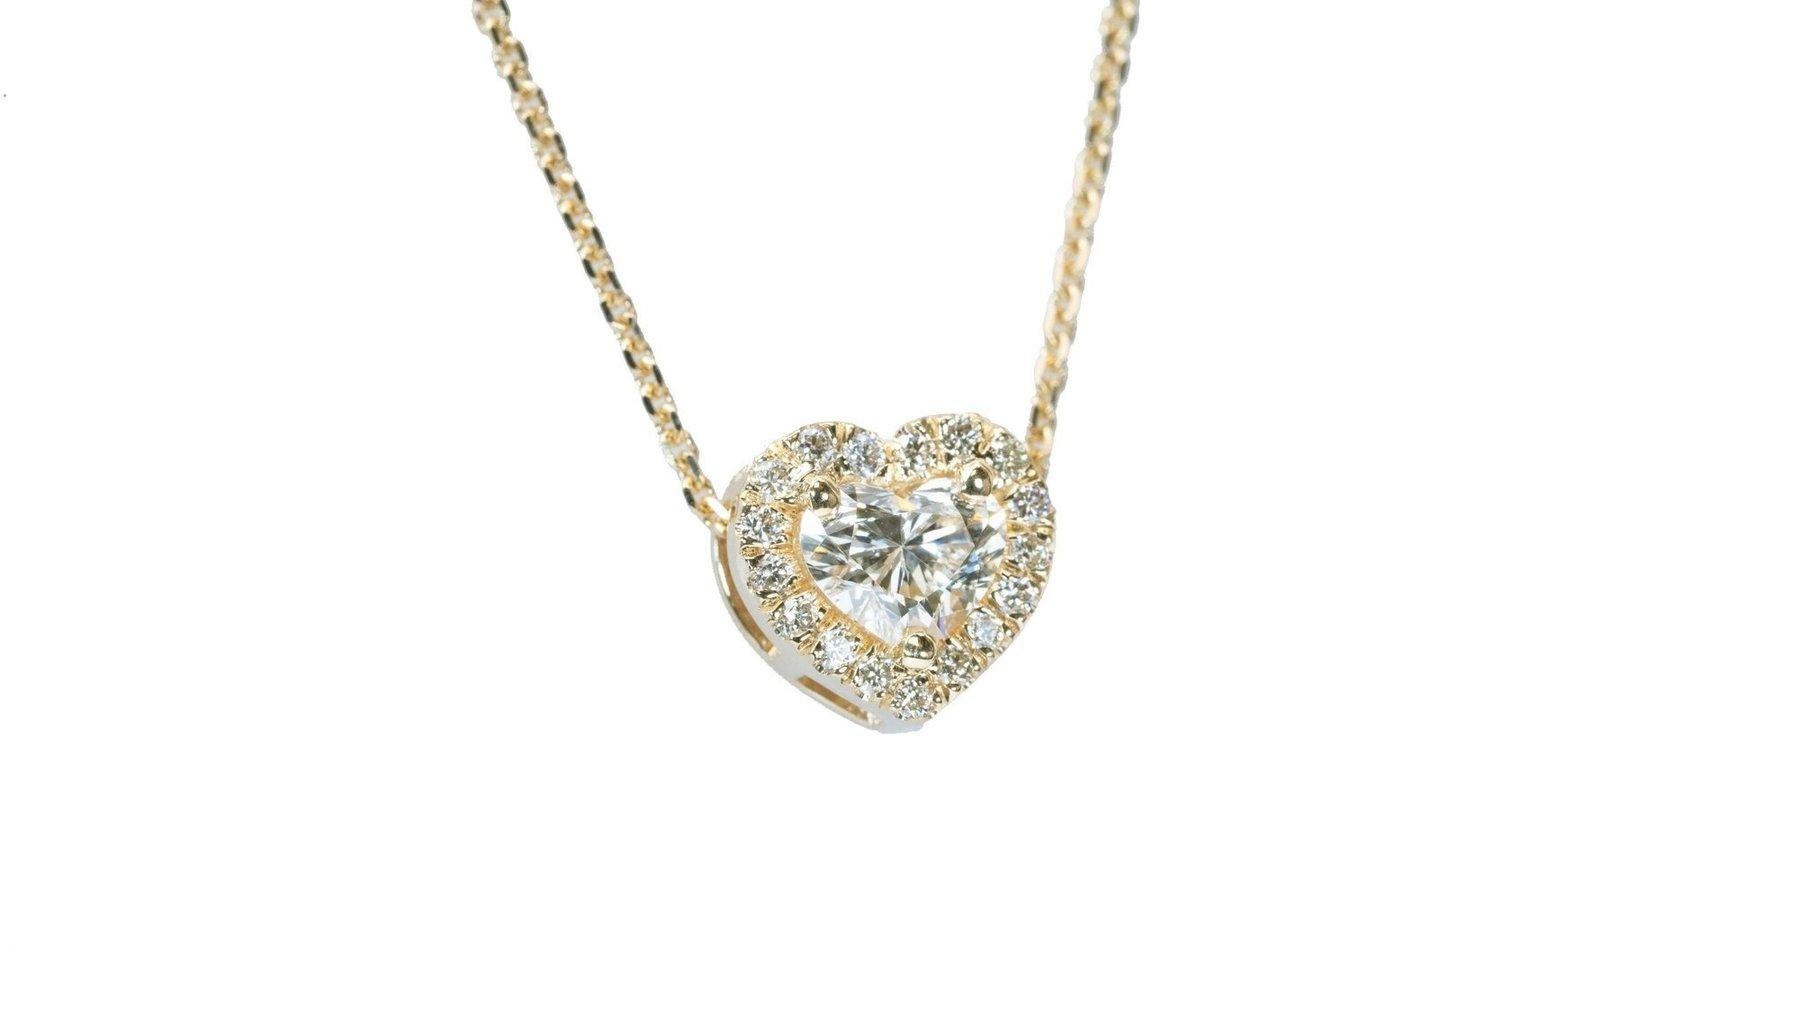 
Introducing our enchanting 18K Yellow Gold Heart Halo Necklace, adorned with a dazzling 1.12 carat centerpiece that radiates elegance and charm. Surrounding this mesmerizing center stone are 16 exquisite round brilliant diamonds, totaling 0.12